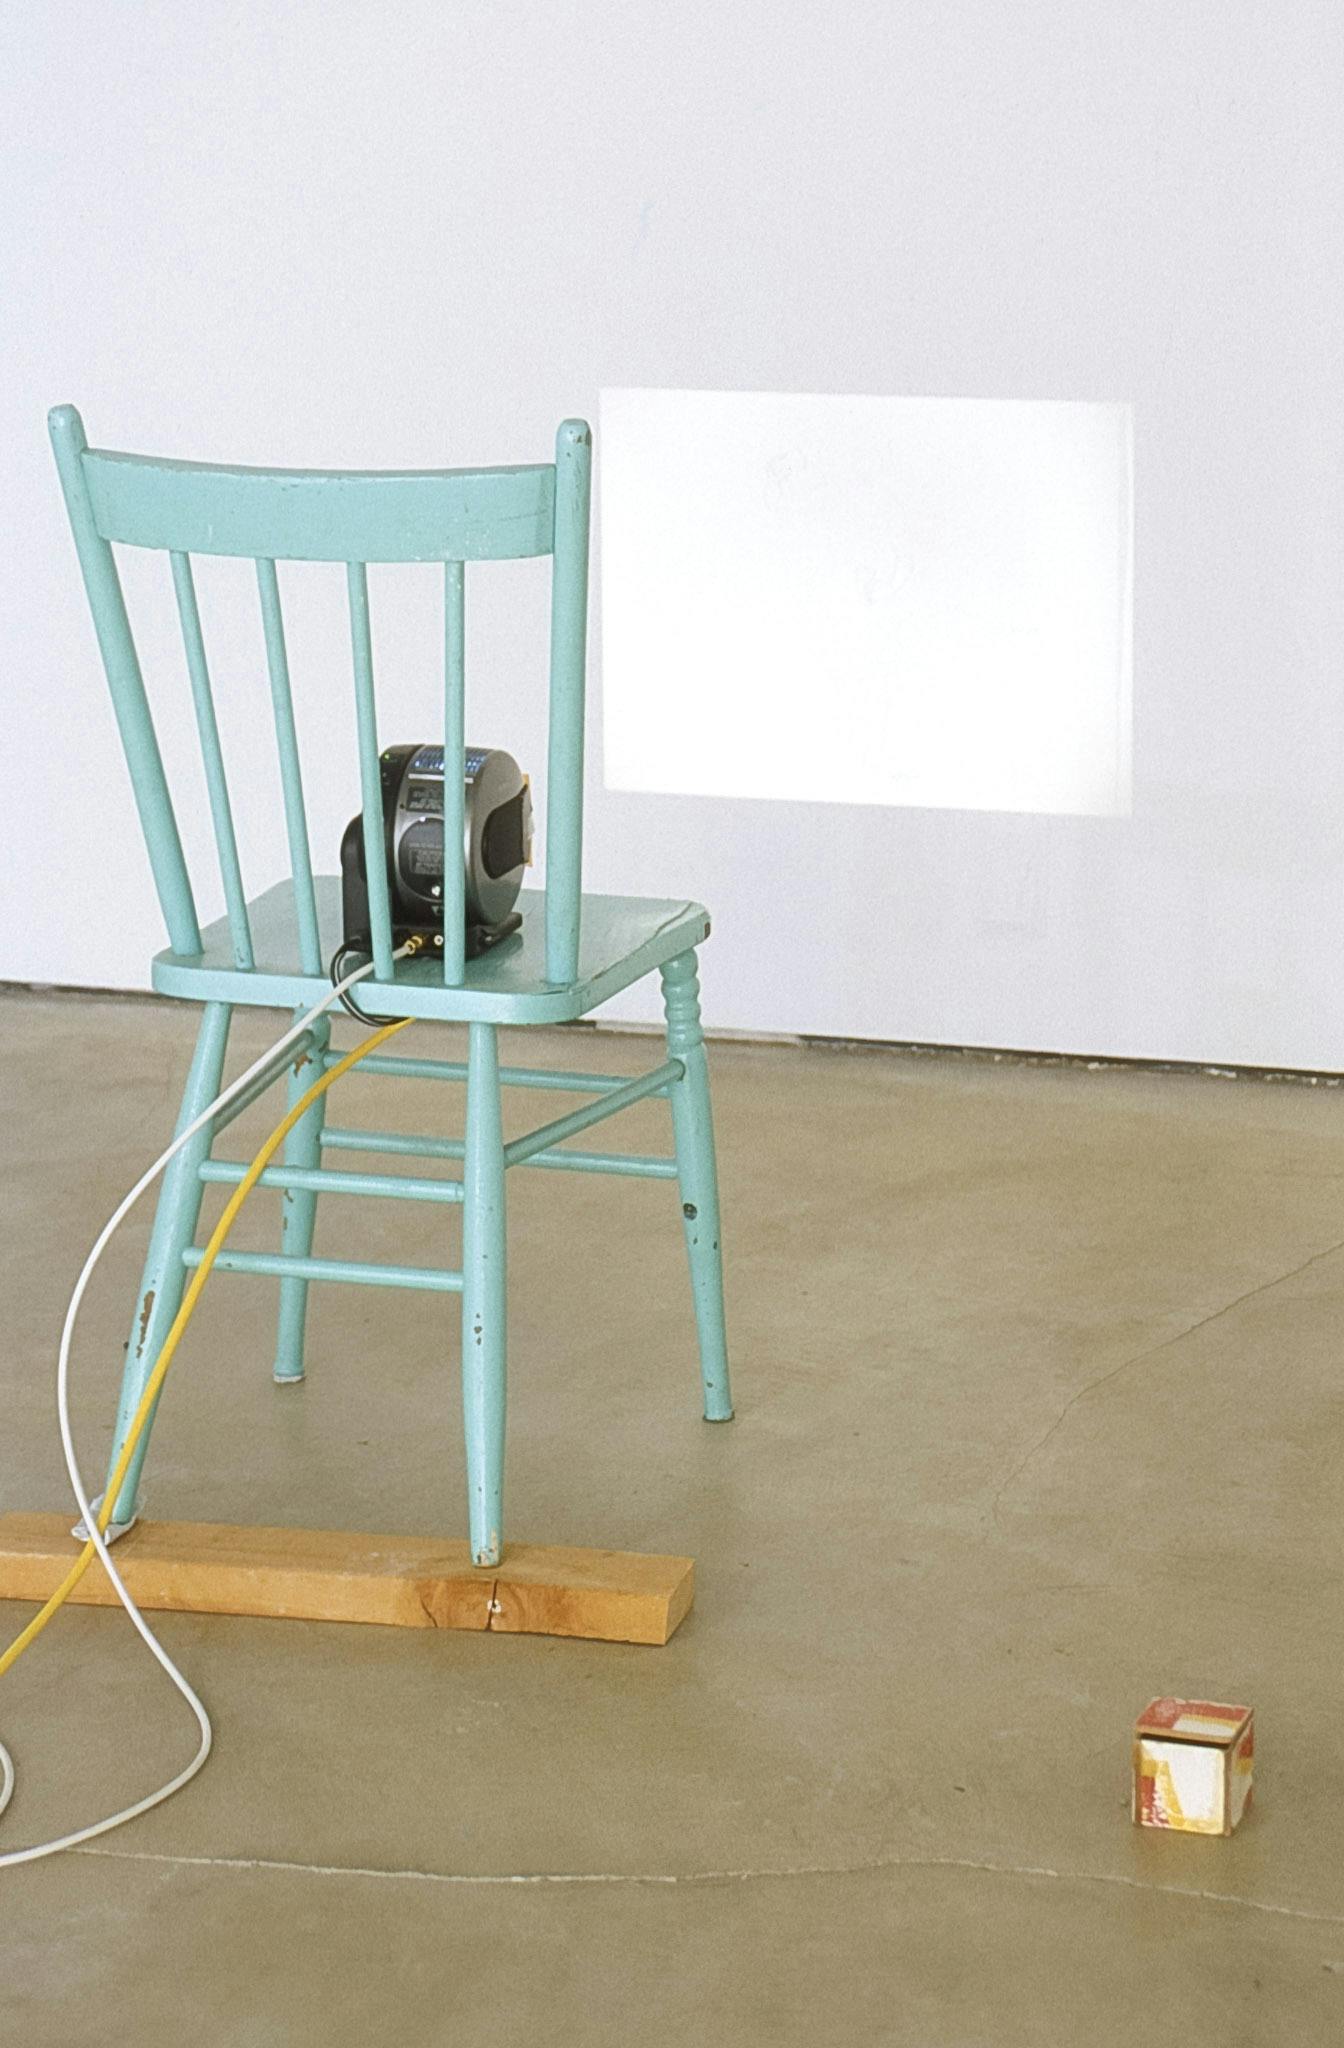 A small projector is placed on the light blue painted wooden chair in the gallery. The projector, connected to white and yellow codes, projects a blank white rectangle on the white gallery wall.